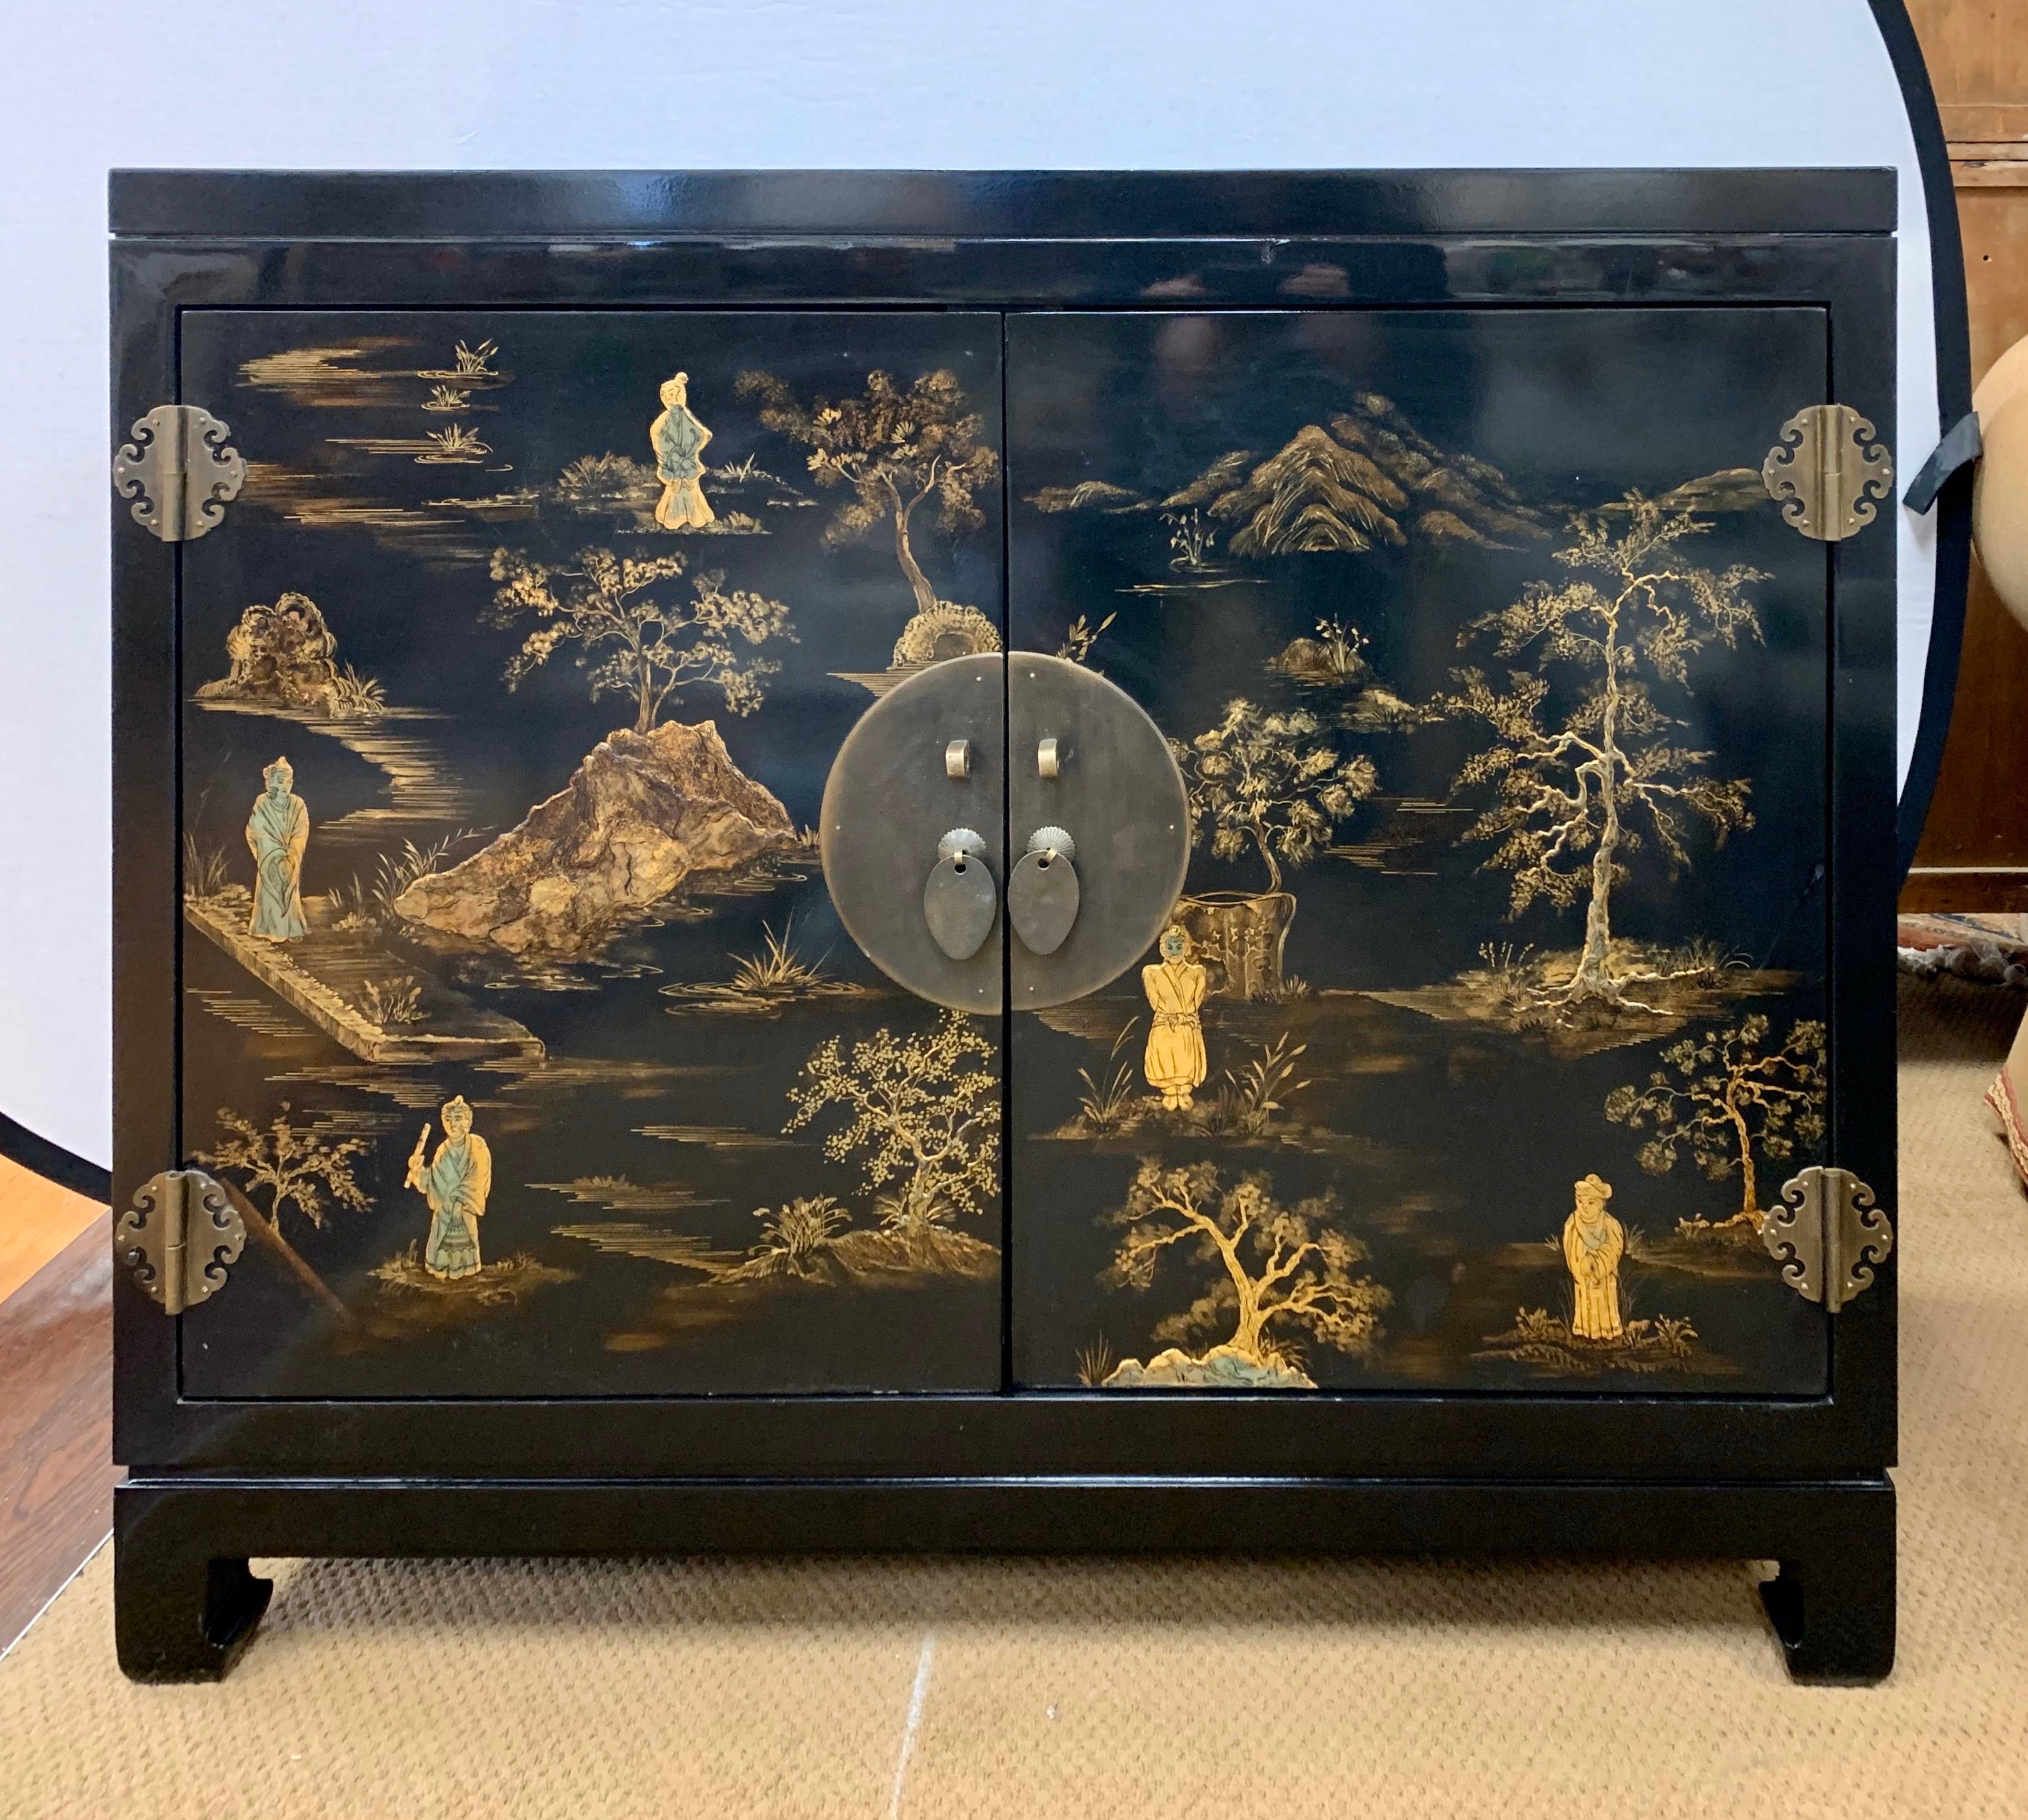 A stunning Mid-Century Modern black lacquer cabinet with raised chinoiserie gilt landscape scenes and brass handles on the double doors that open to multiple shelves and drawers inside. This is a substantial, heavy cabinet, with exceptional